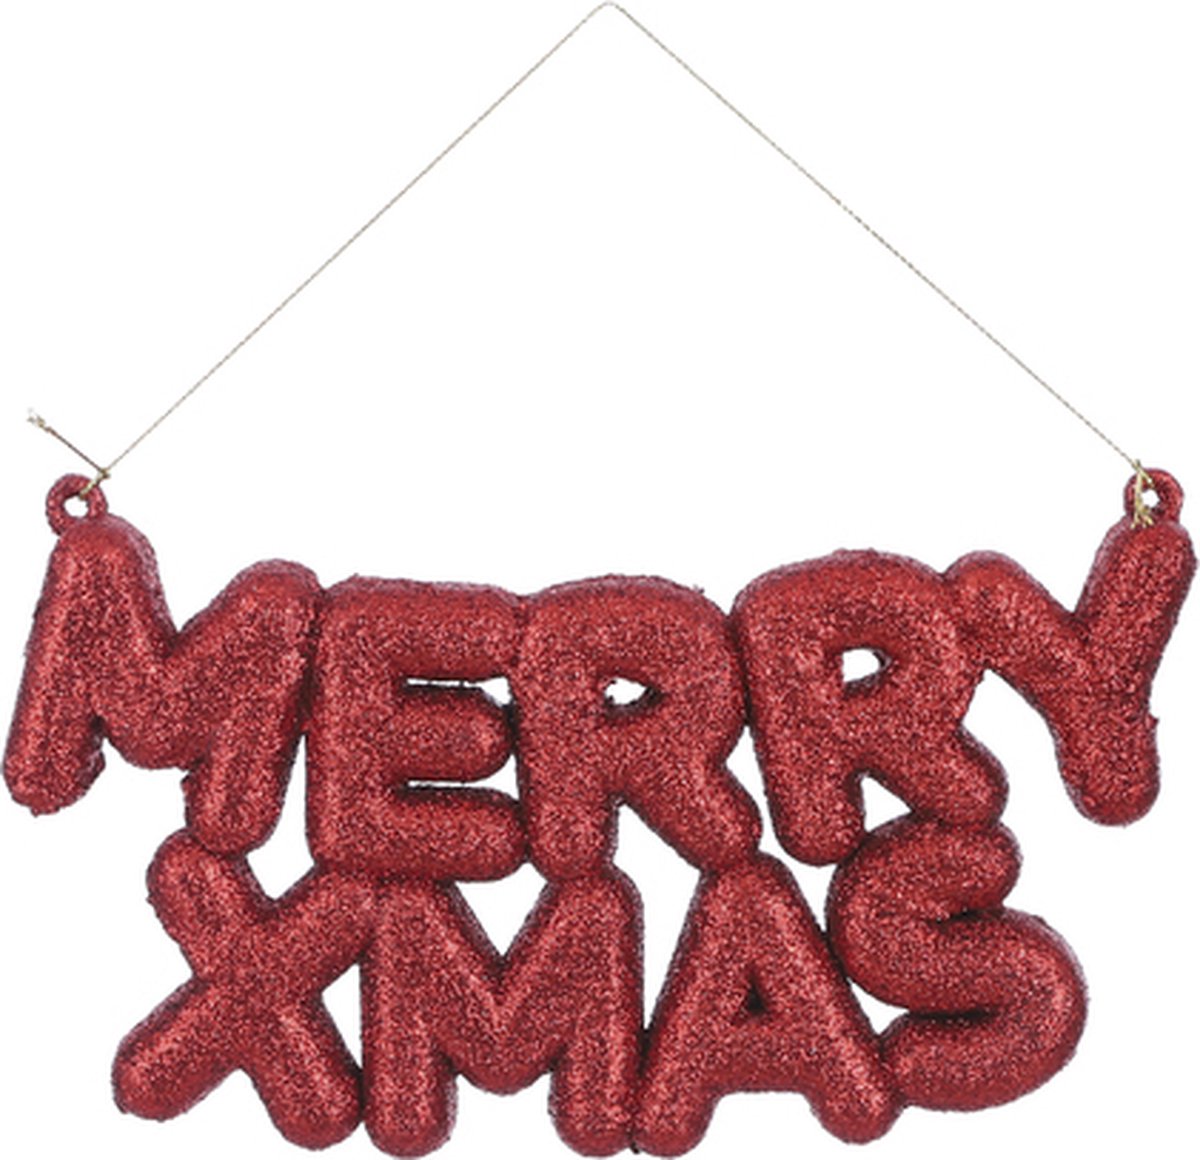 Kersthangers - Ornament Merry Xmas Rood - L20xb10xh1,5cm